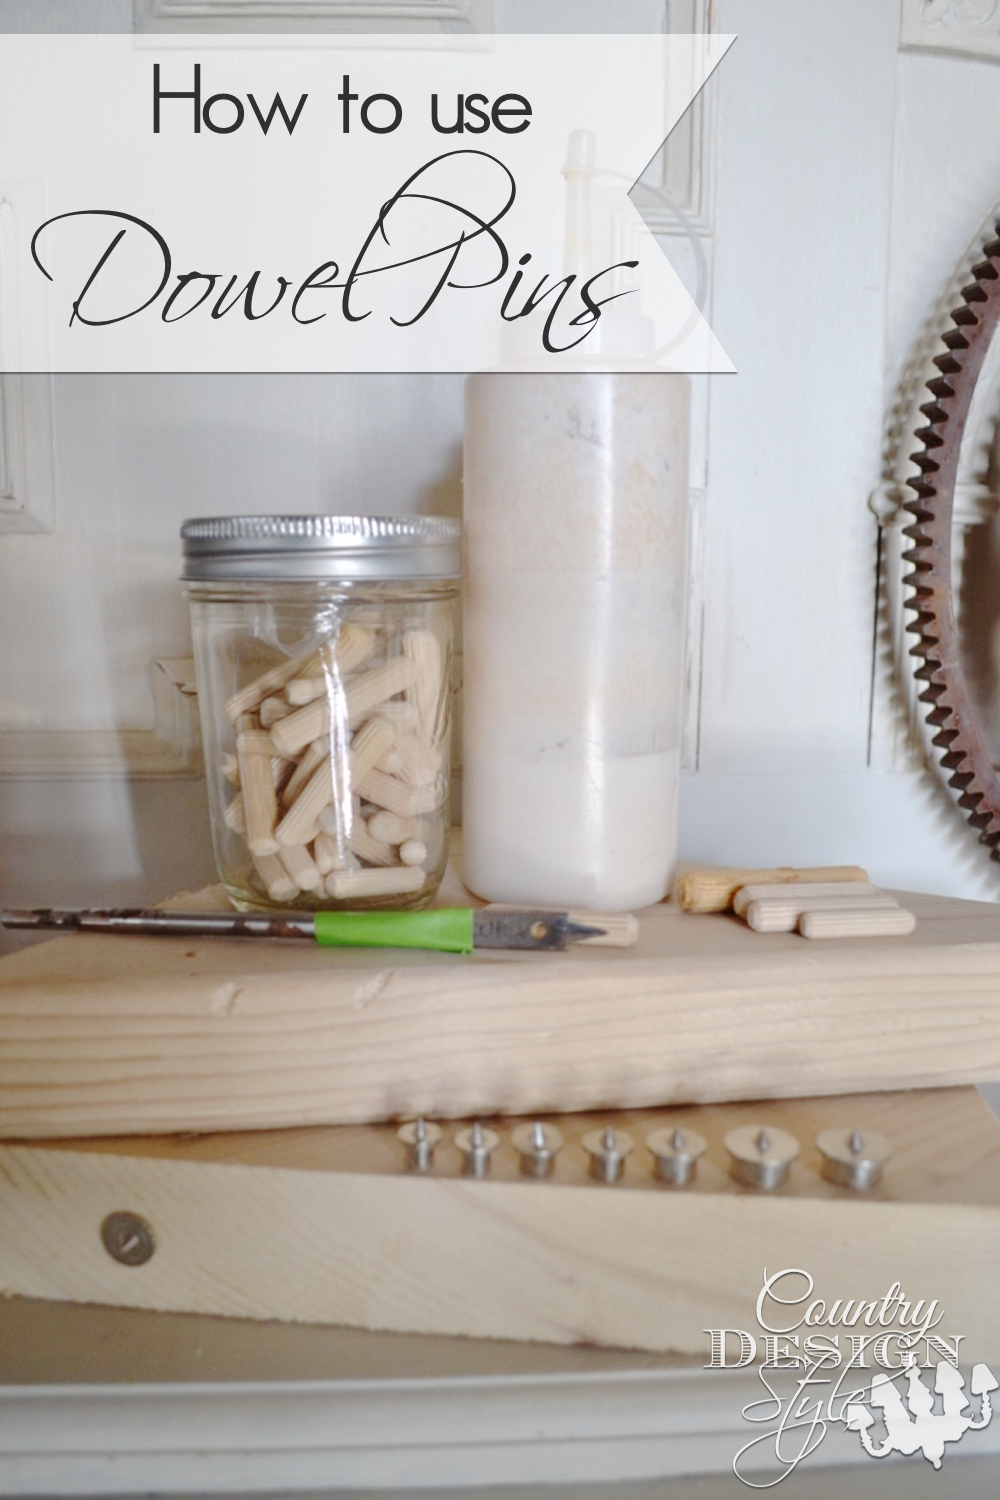 how to use dowel pins in woodworking | Country Design Style | countrydesignstyle.com